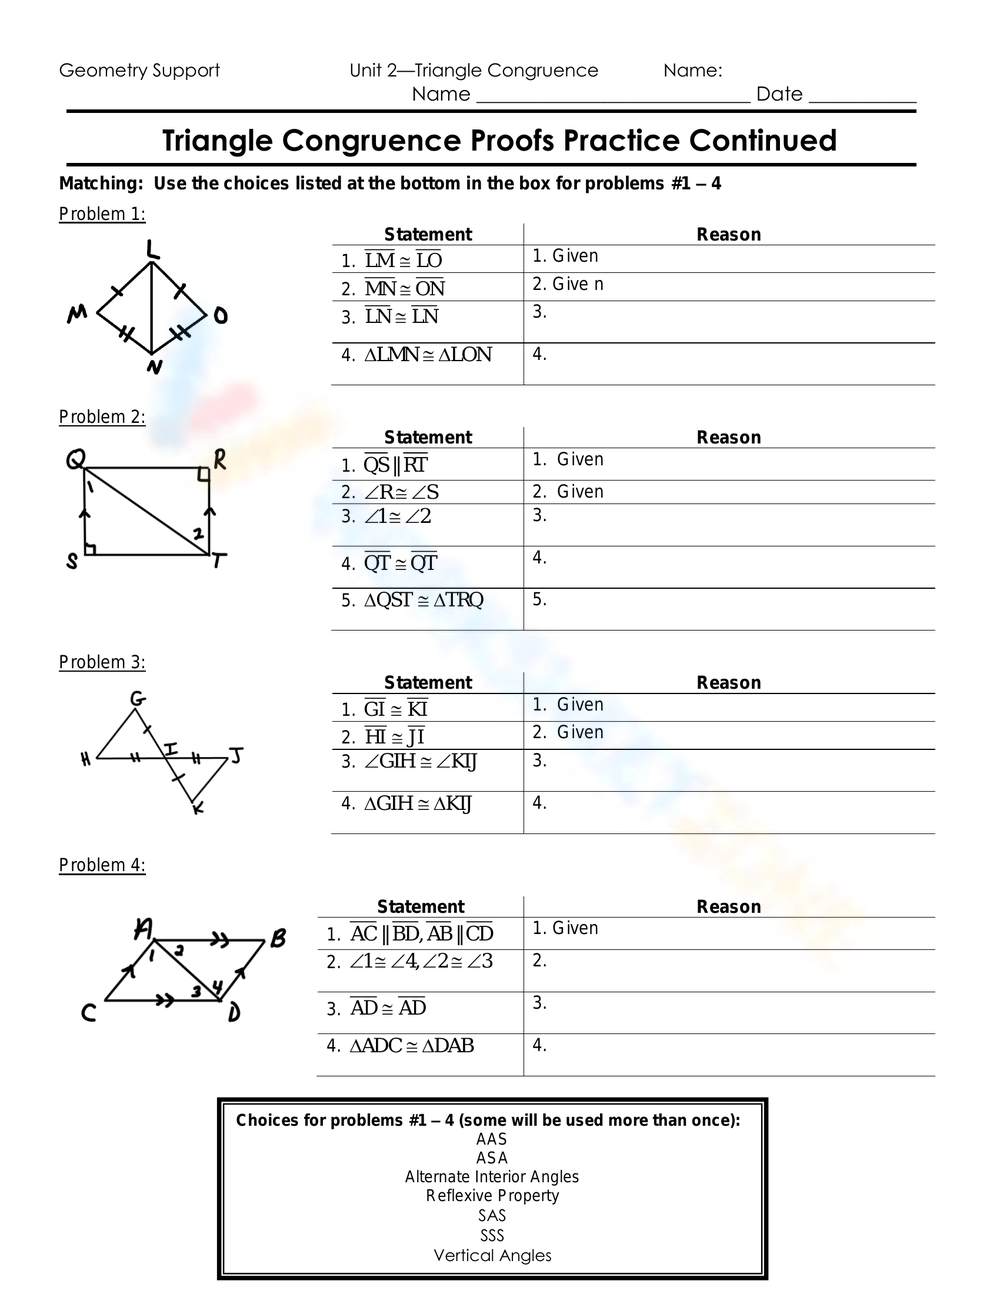 Triangle Congruence Proofs Practice Worksheet 9378